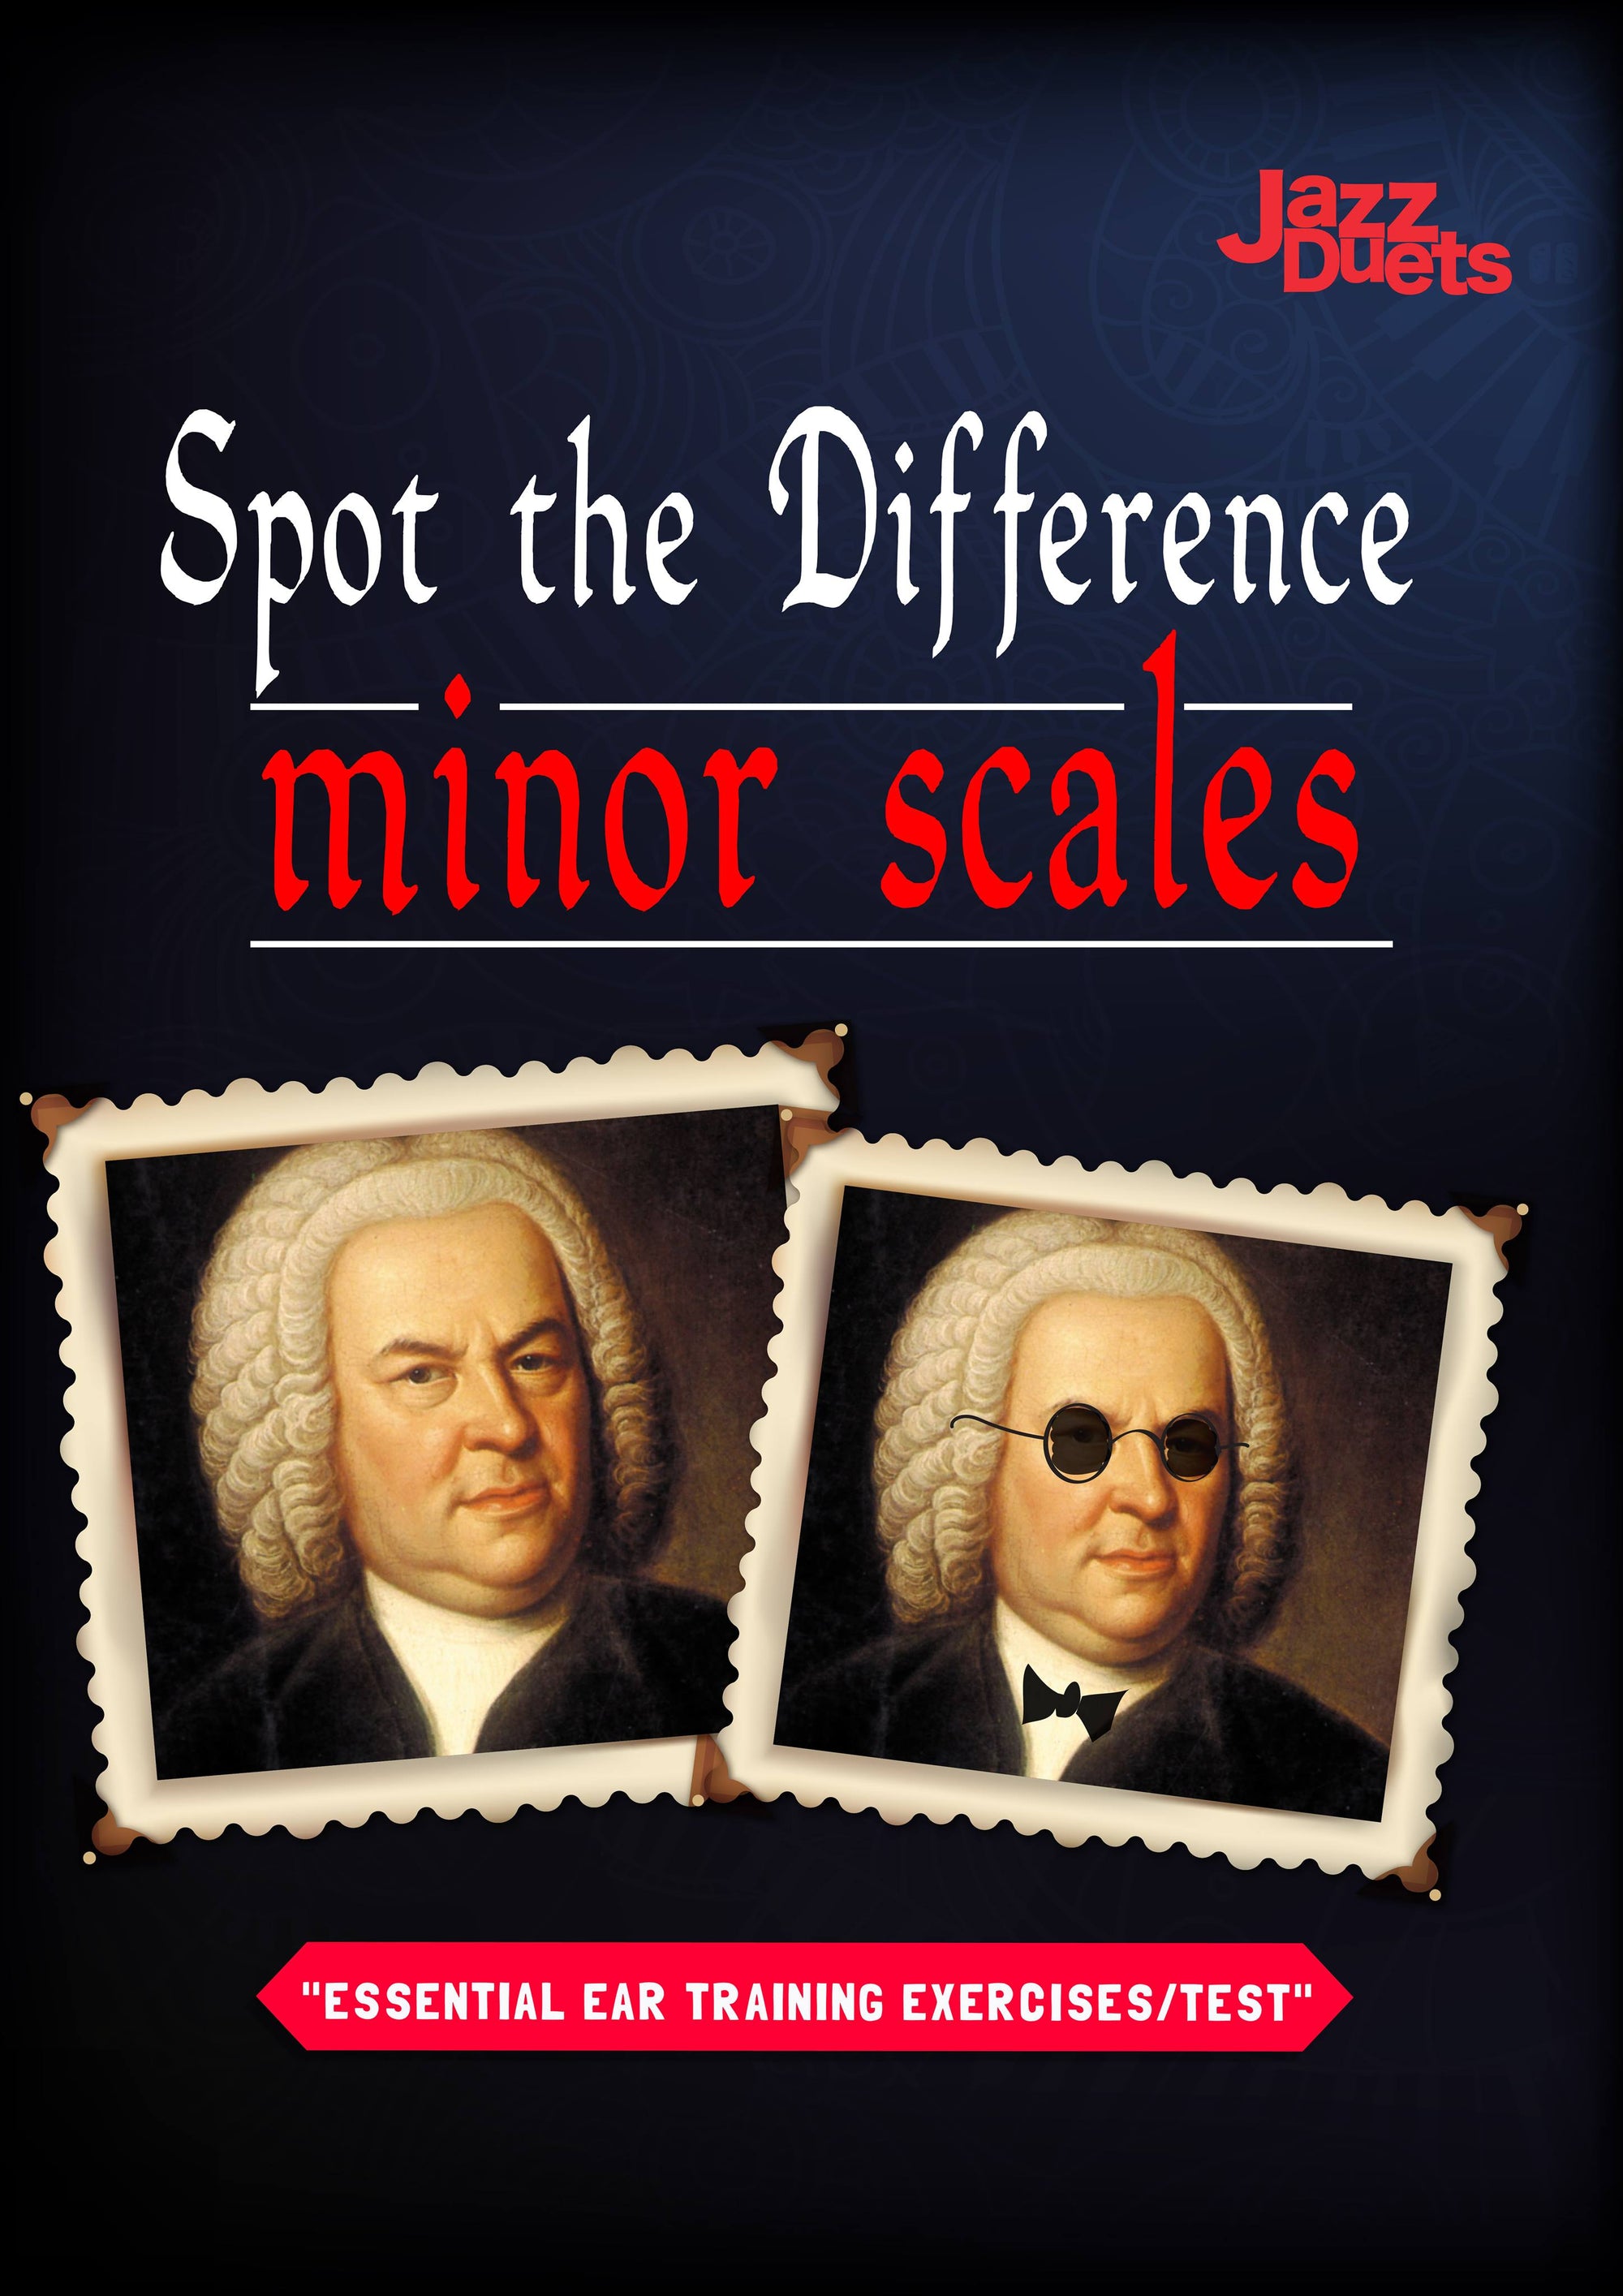 jazzduets- spot the difference eartraining-minor scales